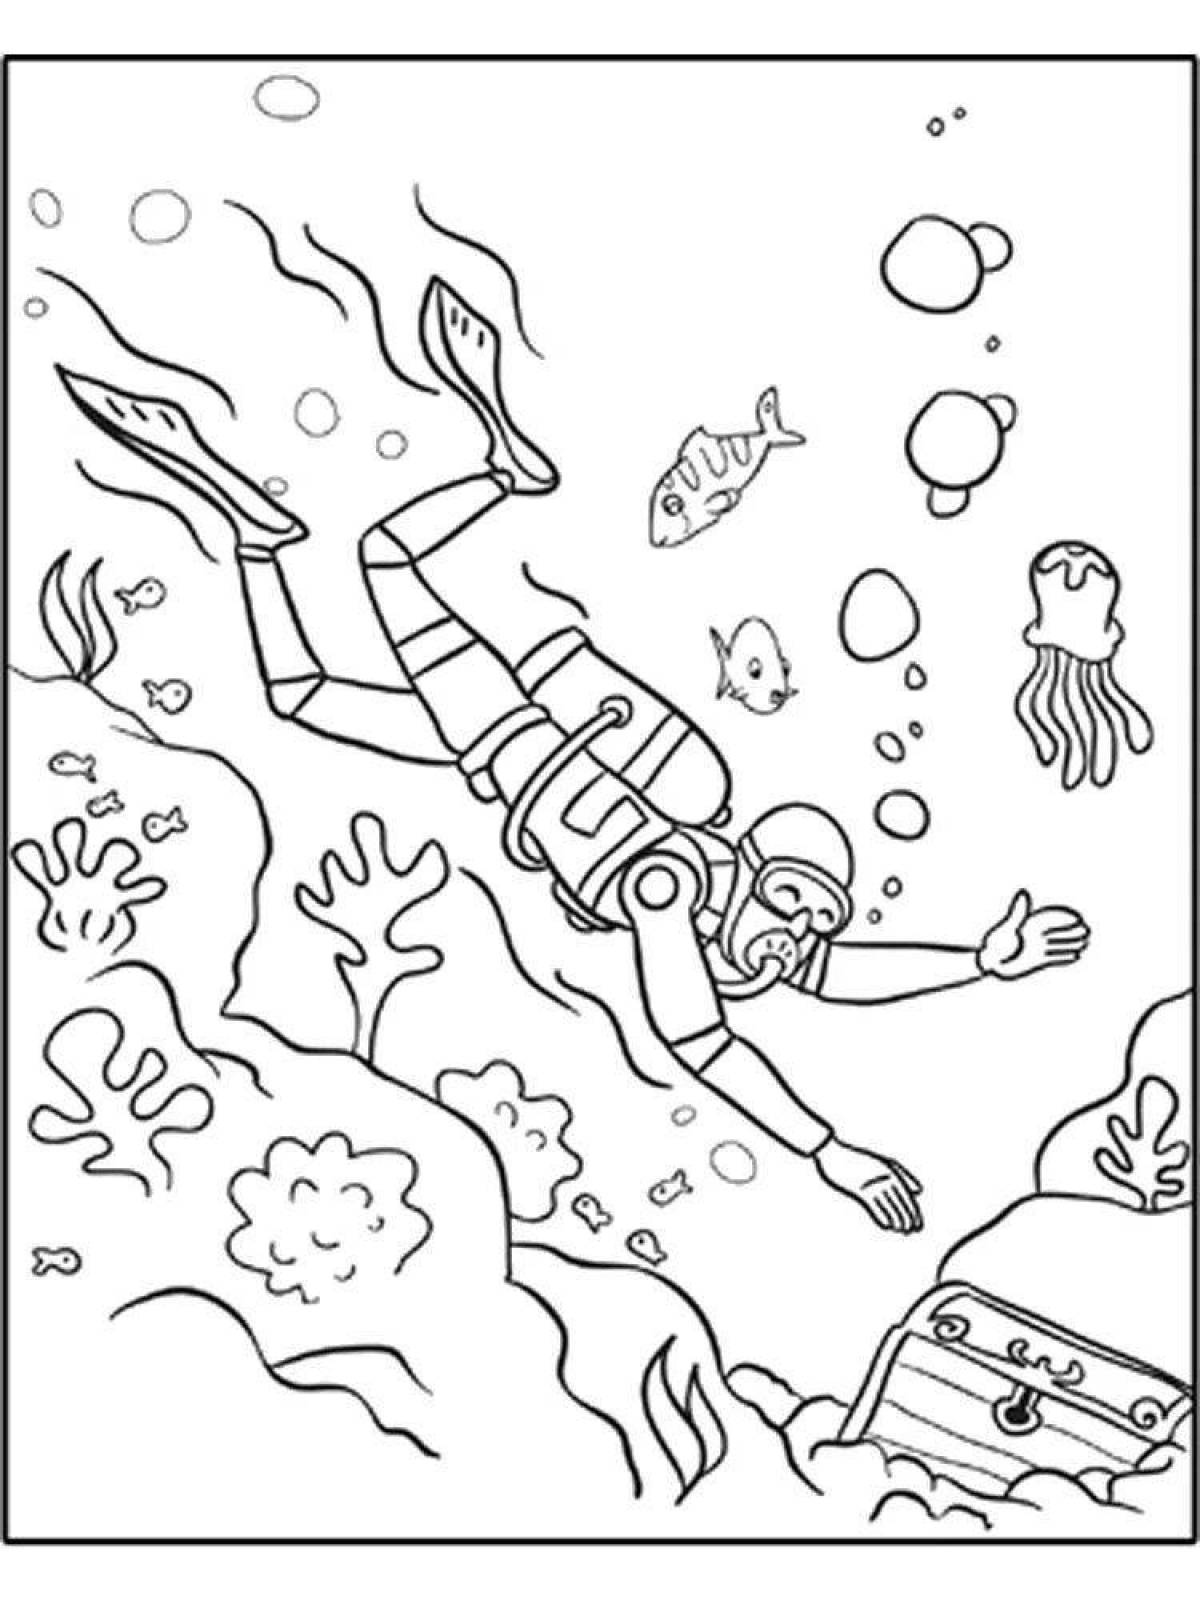 Colouring cool diver